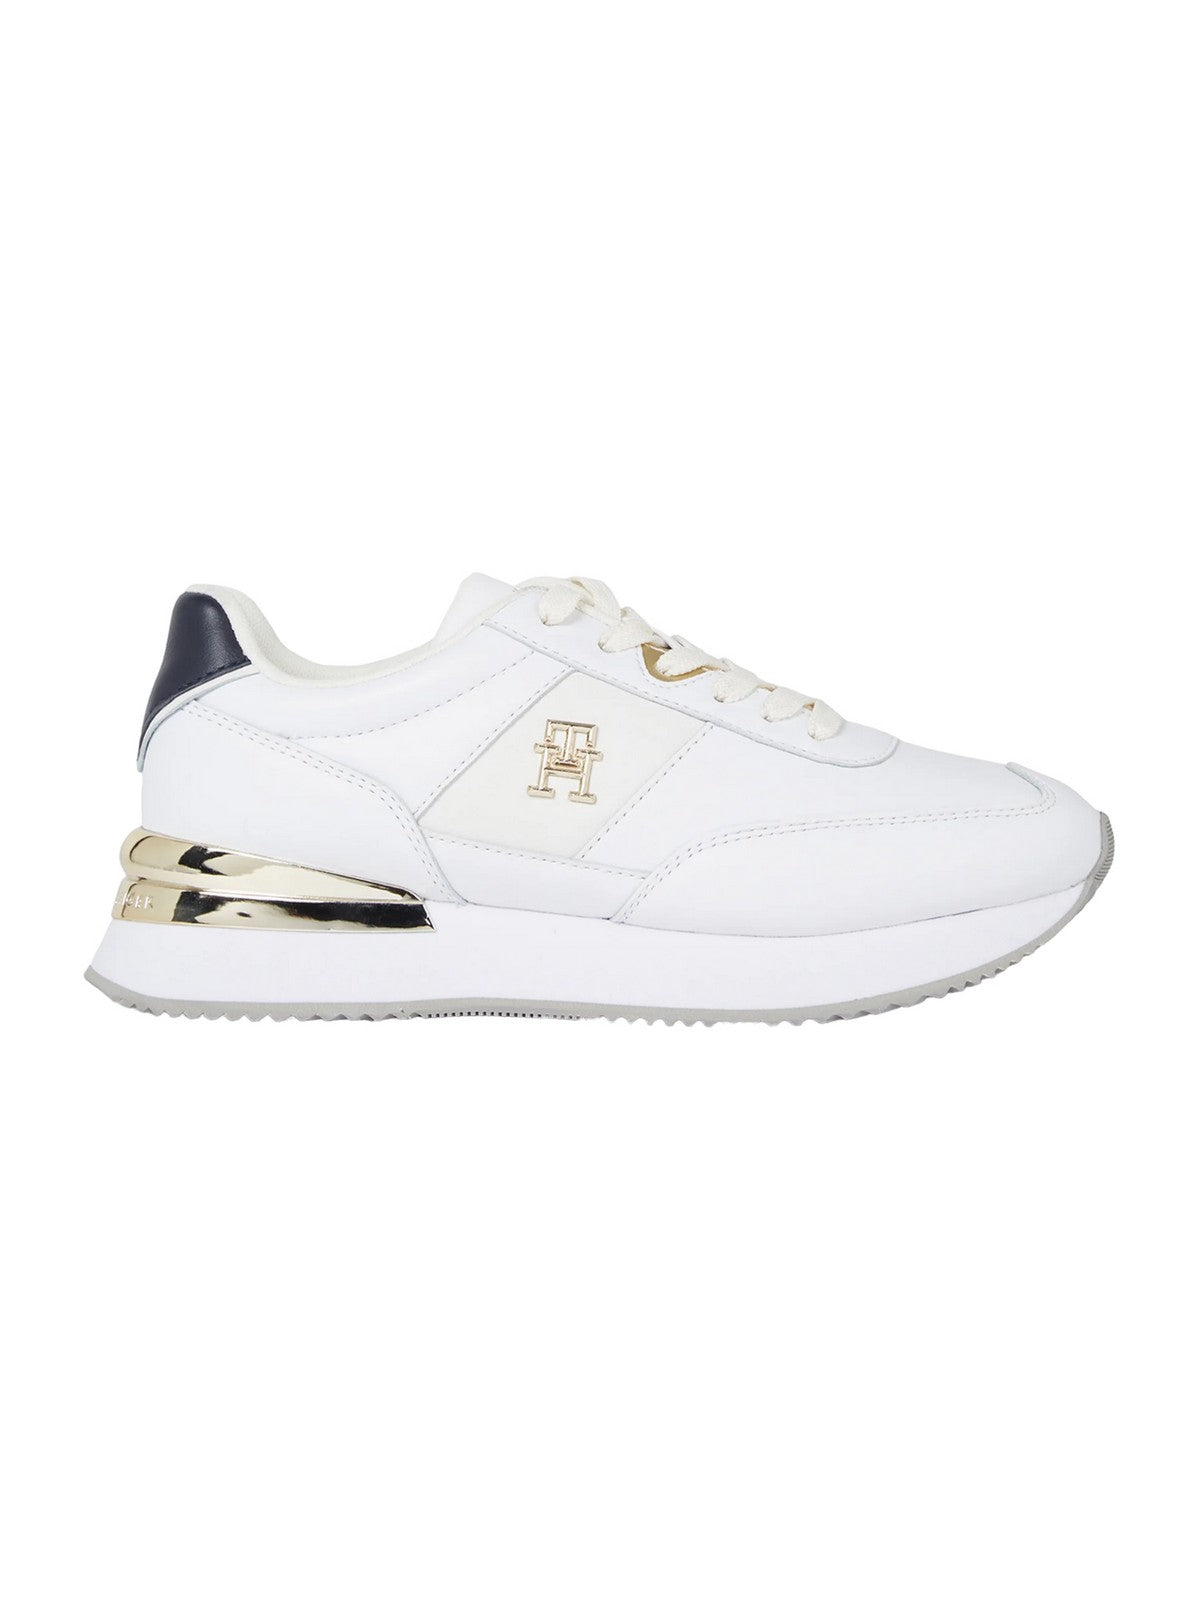 TOMMY HILFIGER Sneaker Donna  FW0FW07306 YBS Bianco